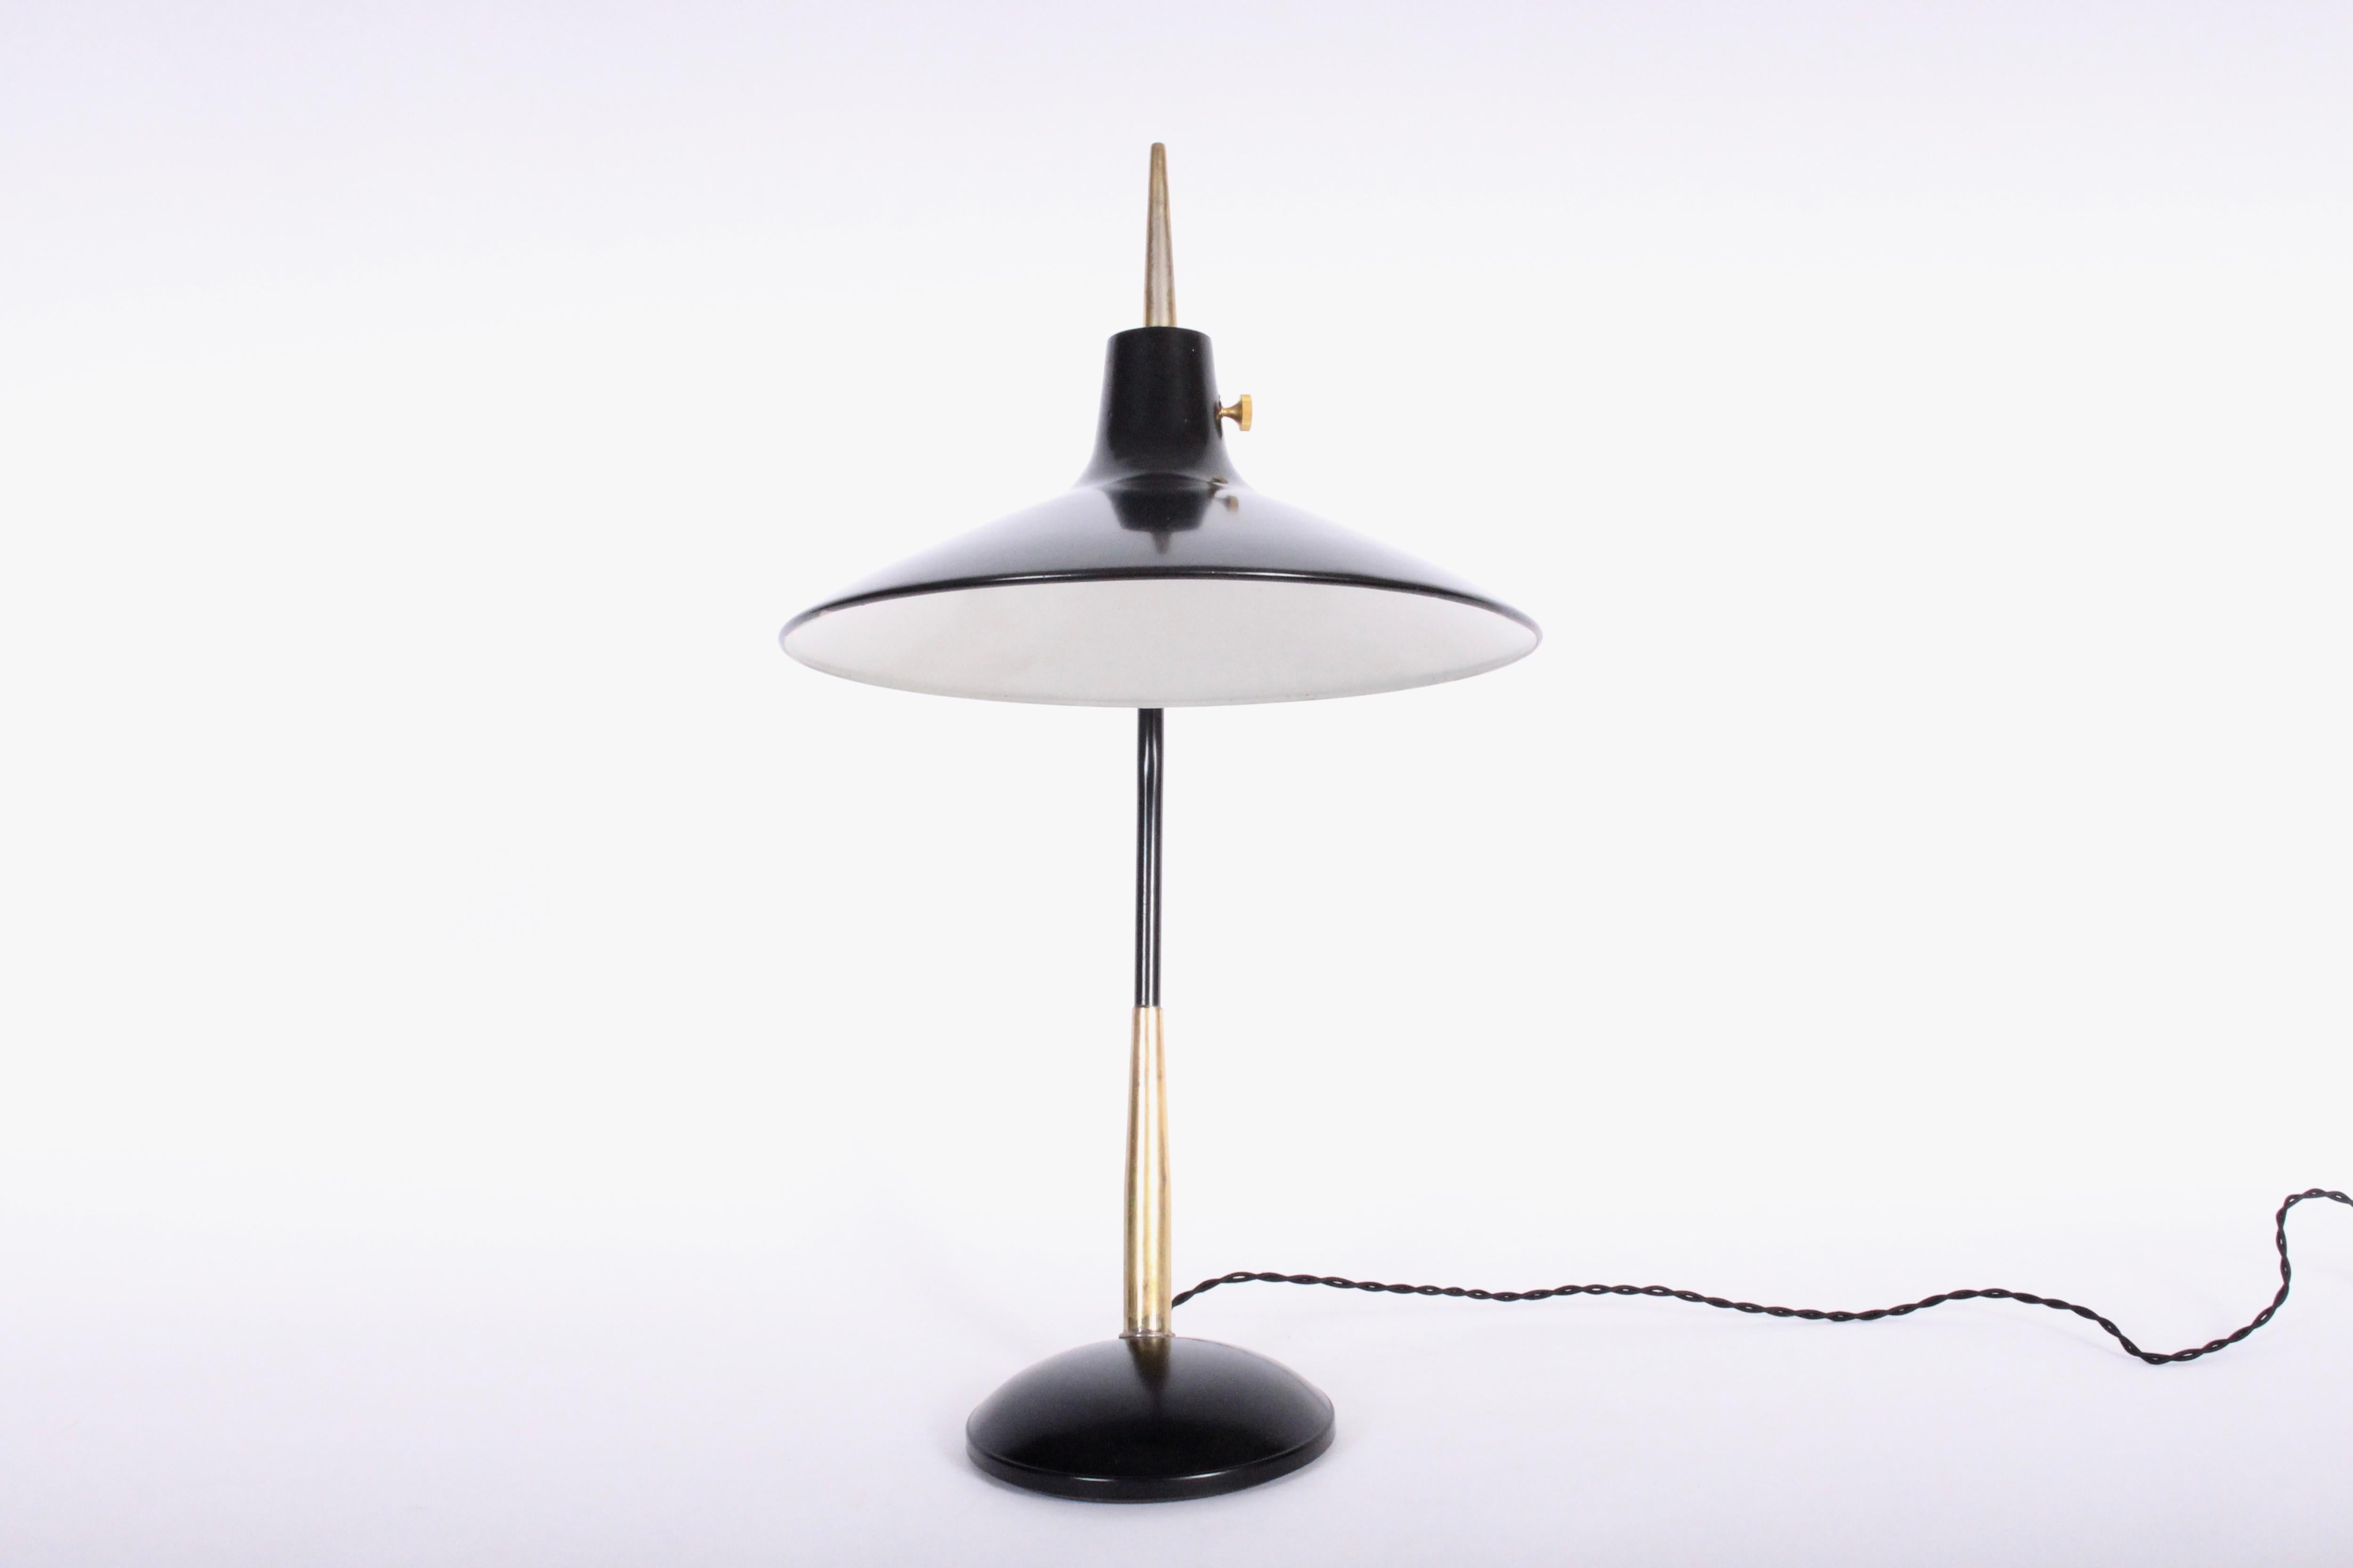 Mid-Century Modern Gio Ponti for Laurel Lamp Co. Black and Brass Desk Lamp with Black Enamel Shade